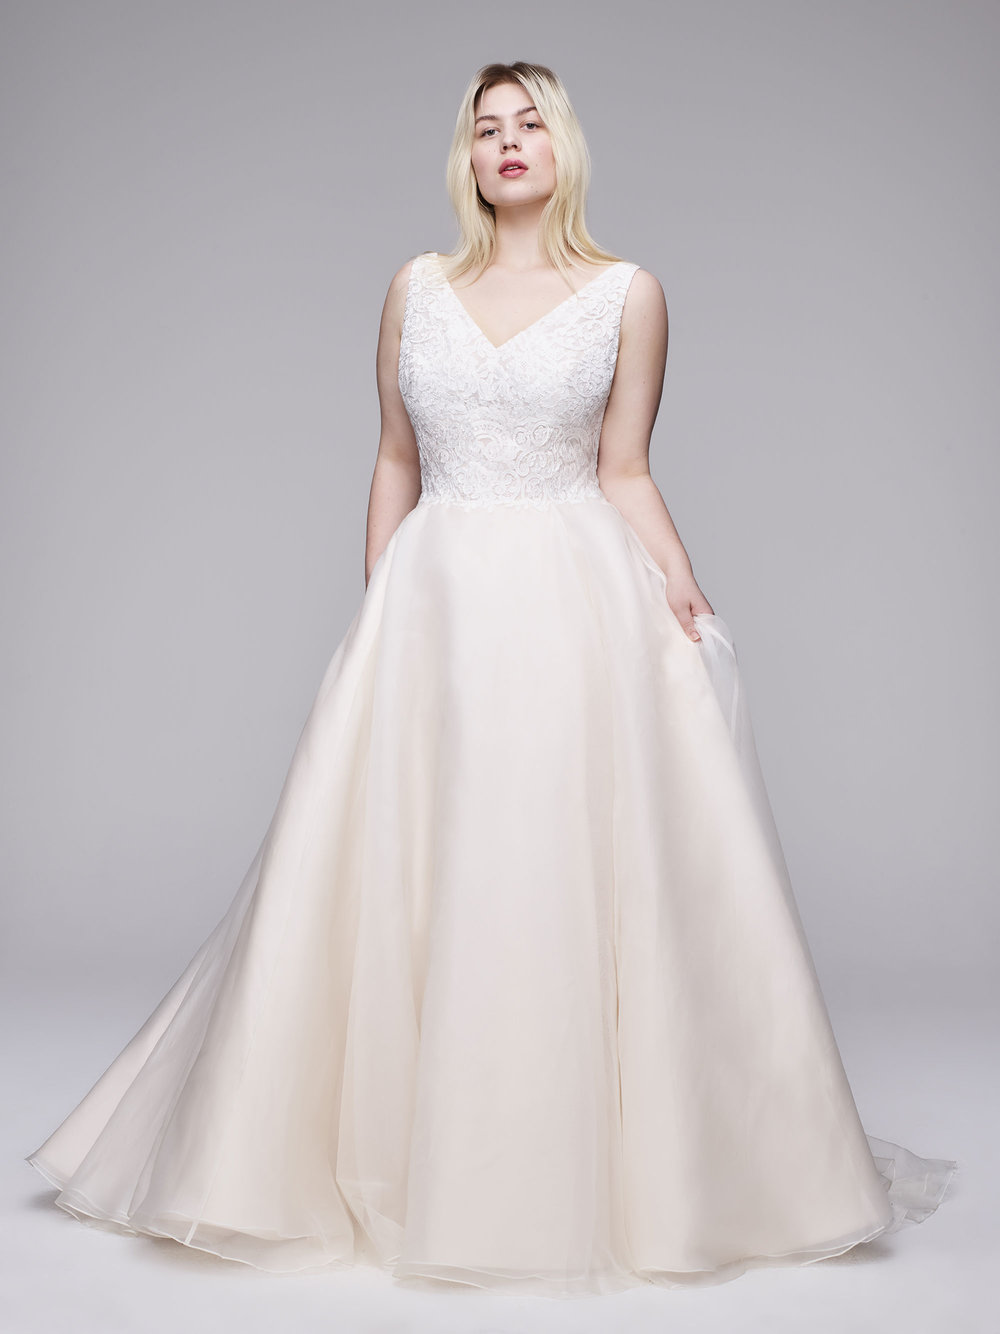 The Fowler plus size wedding gown from Curve Couture by Anne Barge